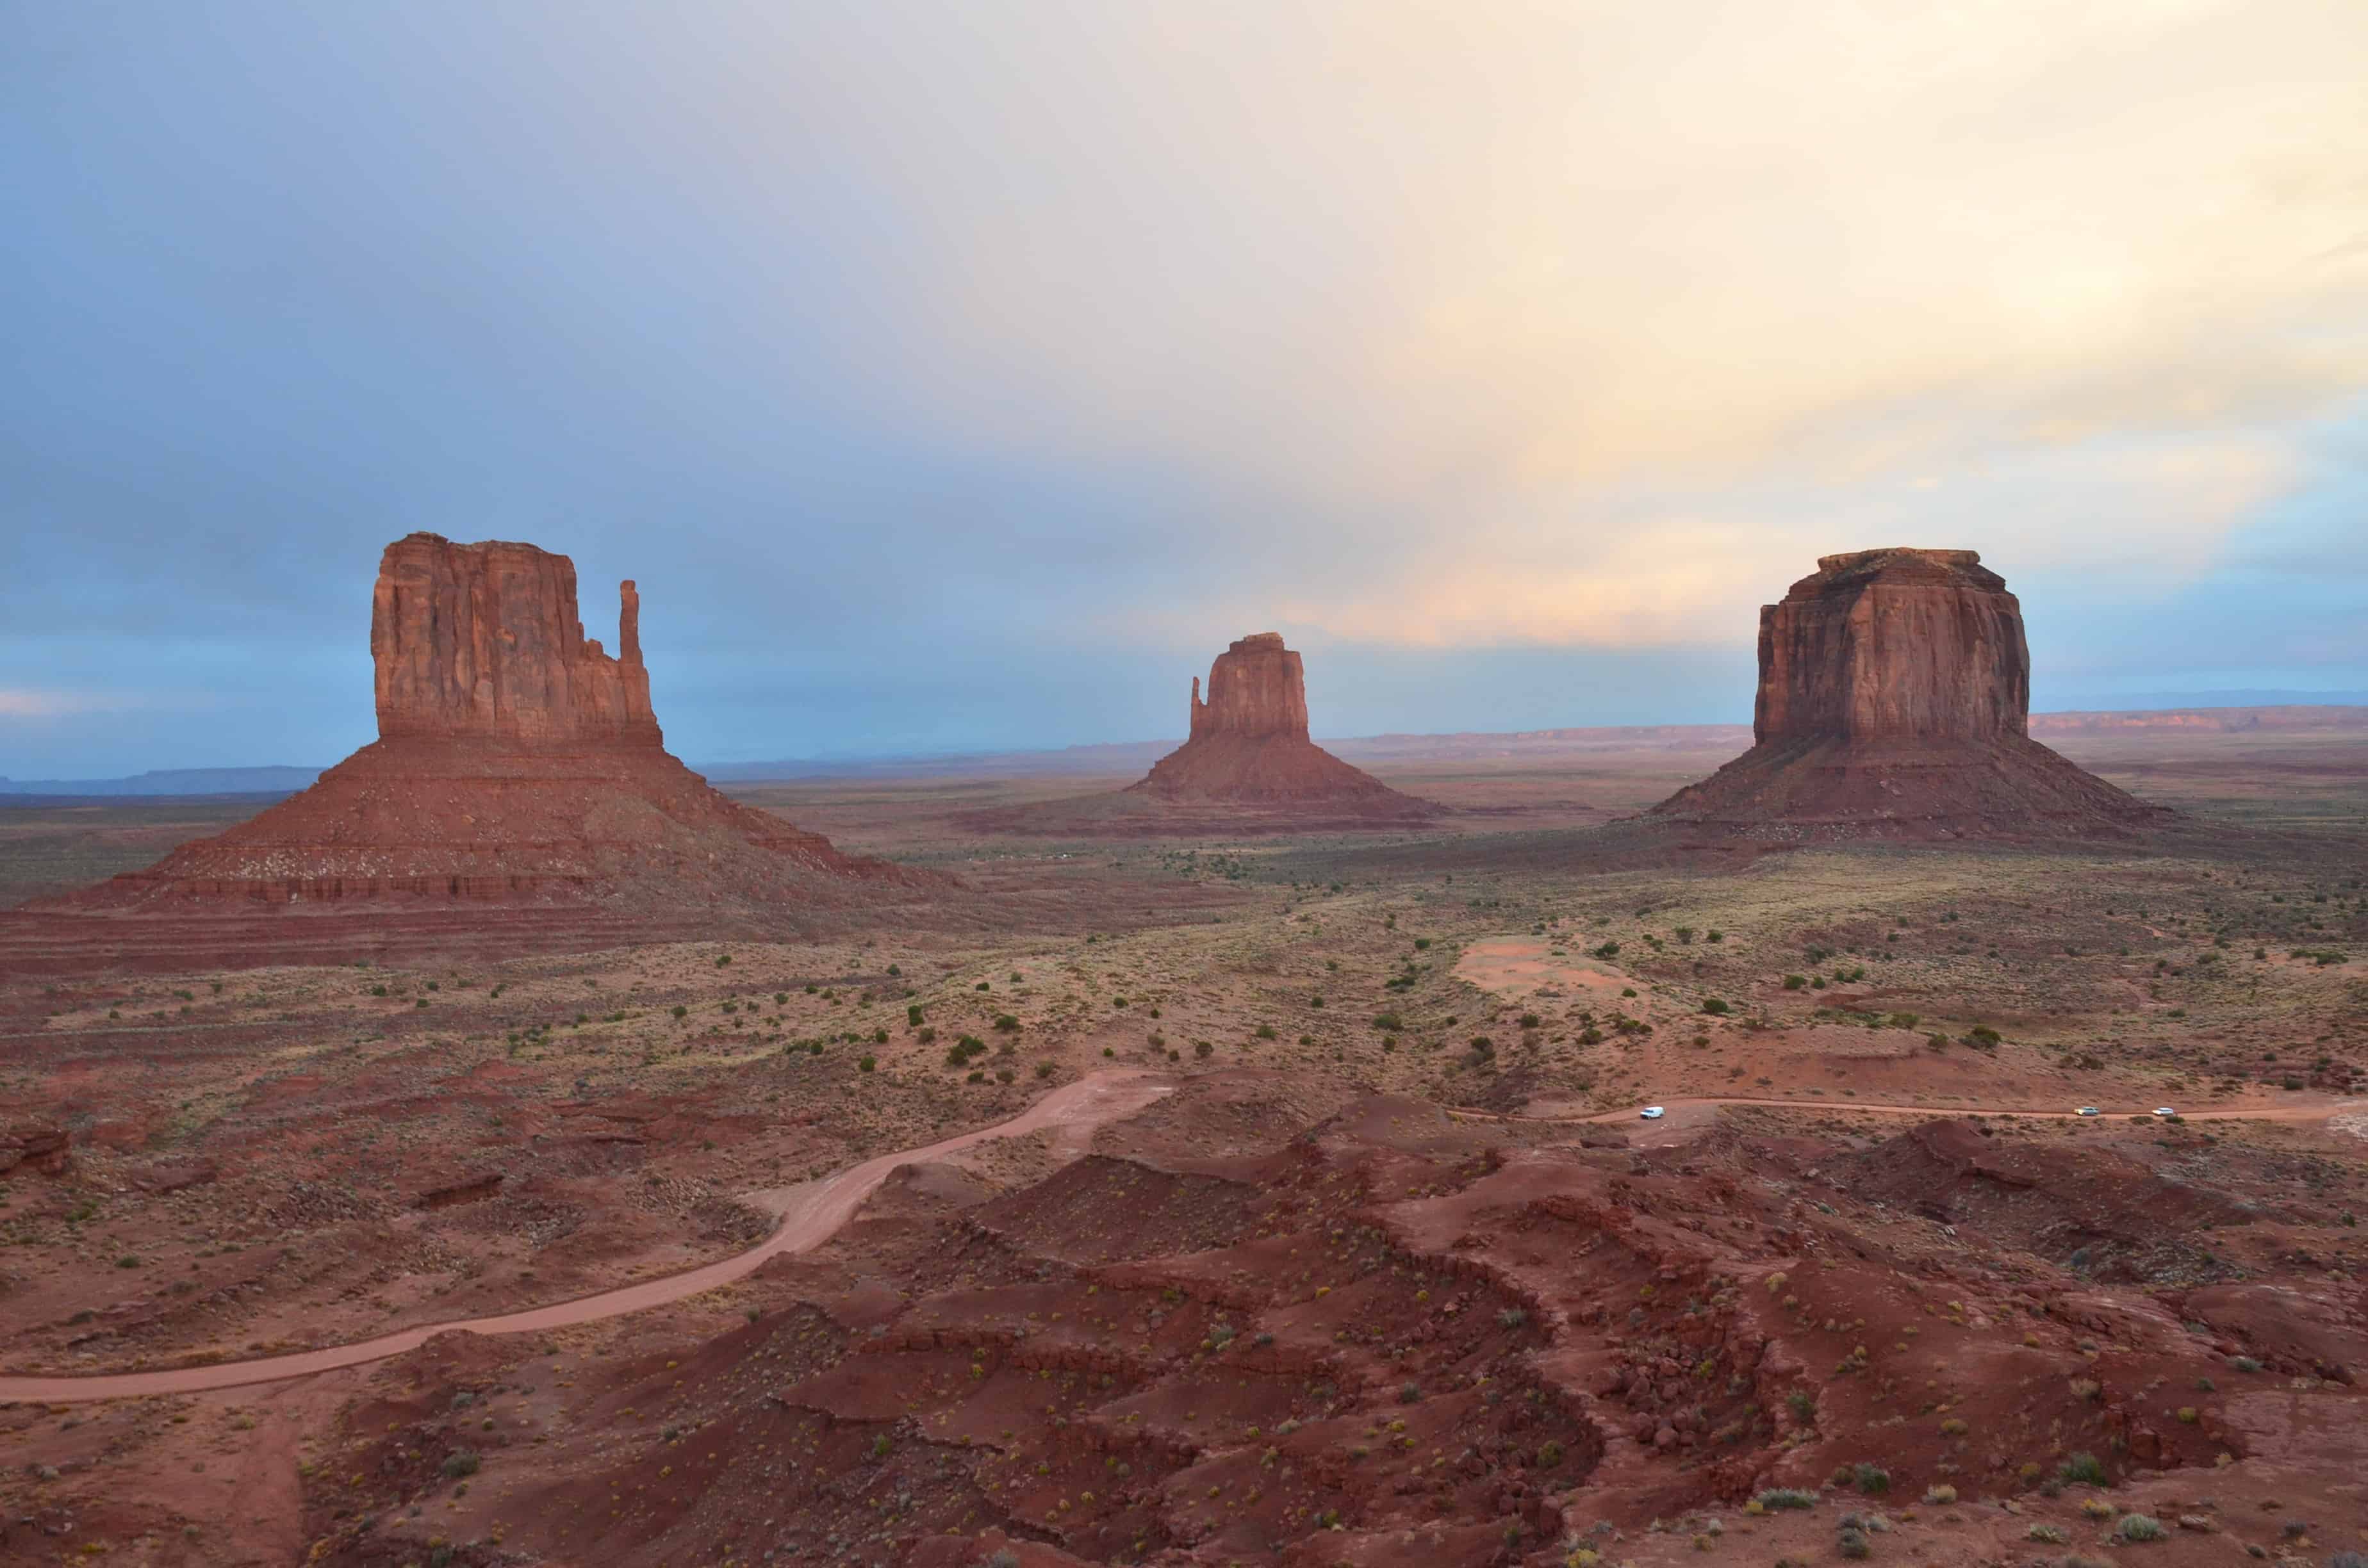 Buttes from the viewpoint at Monument Valley Tribal Park in Arizona